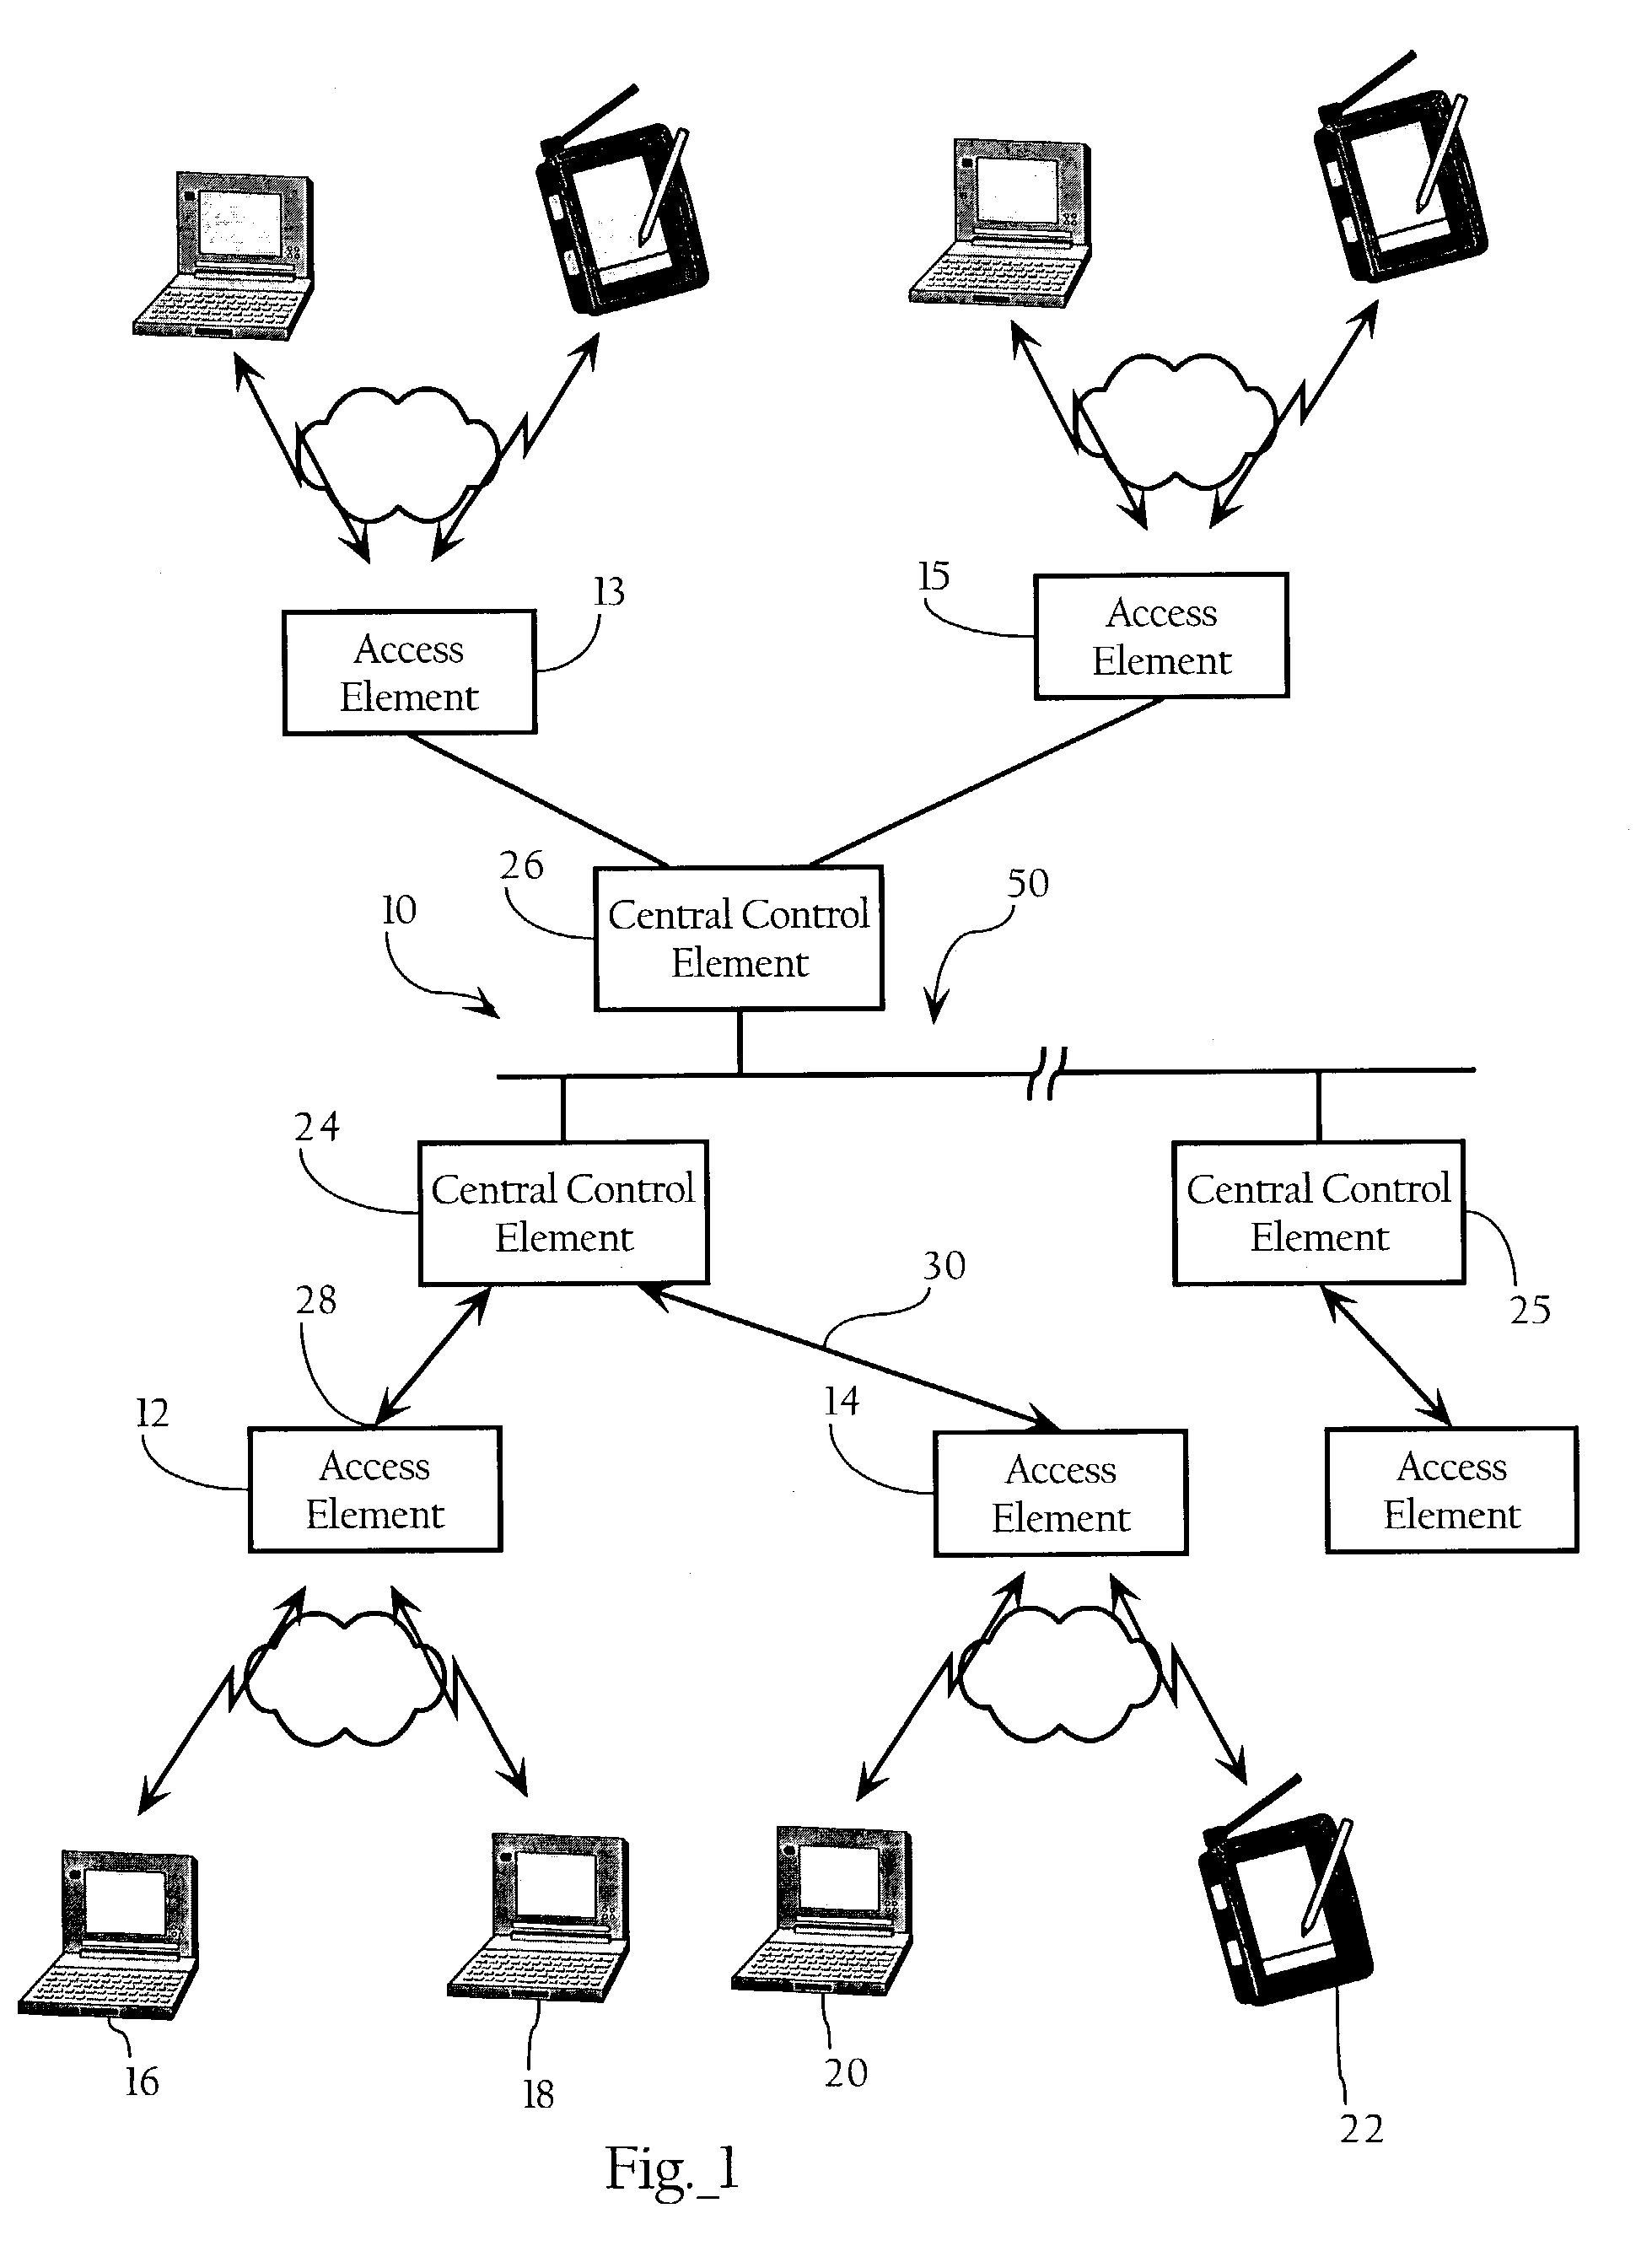 Wireless network infrastructure including wireless discovery and communication mechanism